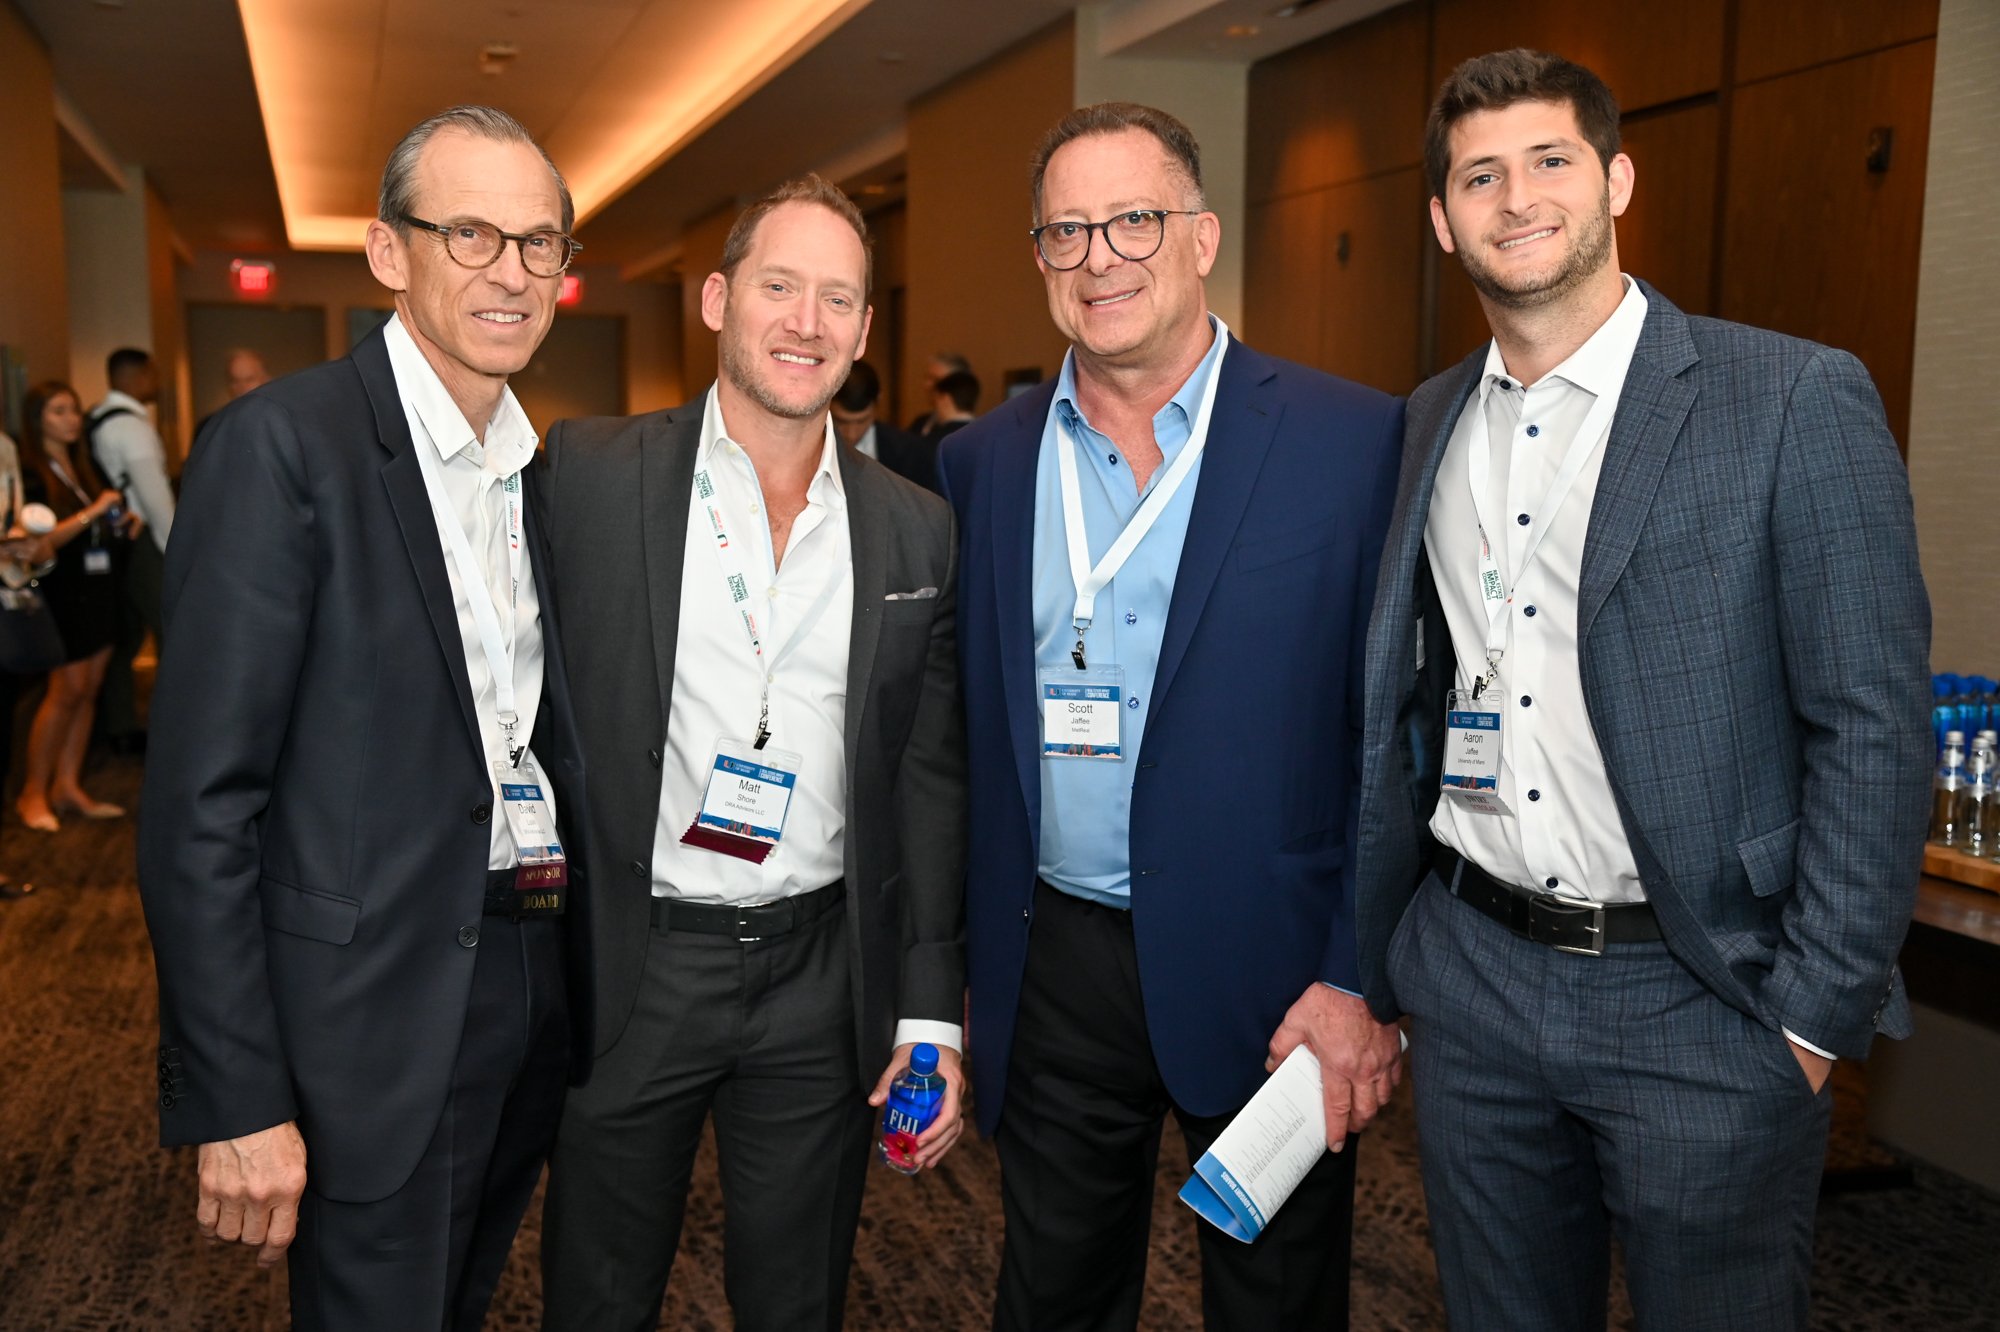 University of Miami Real Estate Impact Conference 2023 The Largest Edition Yet As Real Estate Leaders Discuss The State of Miami Real Estate 215.jpg